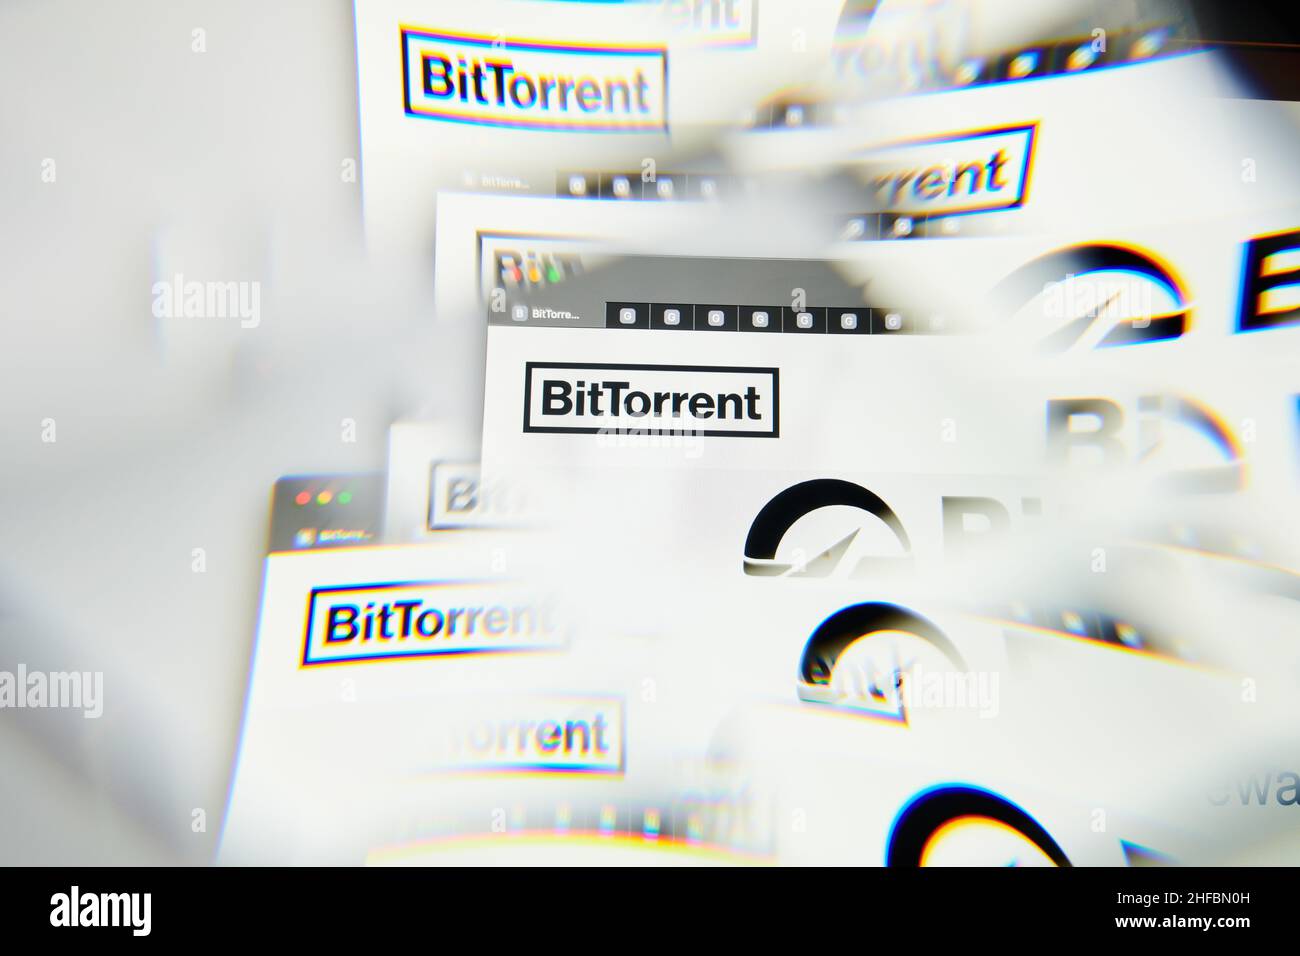 Milan, Italy - January 11, 2022: bittorrent - BTT logo on laptop screen seen through an optical prism. Dynamic and unique image form bittorrent, BTT c Stock Photo